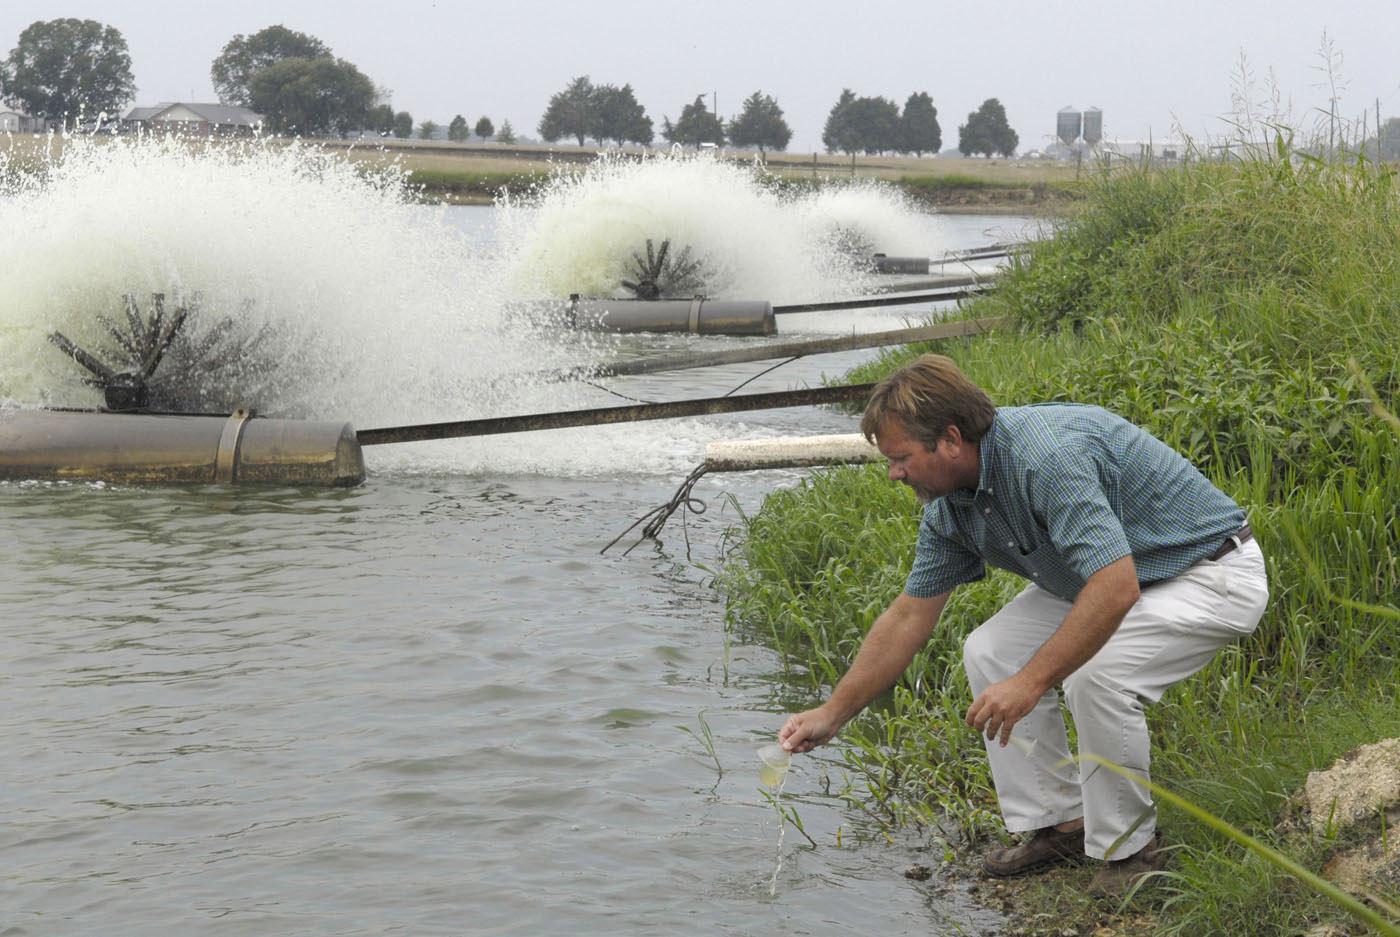 Charlie Hogue, catfish production specialist with the Mississippi State University Extension Service, tests water from a catfish pond at Shirck Fish Farm in Noxubee County. (Photo by Tom Thompson)